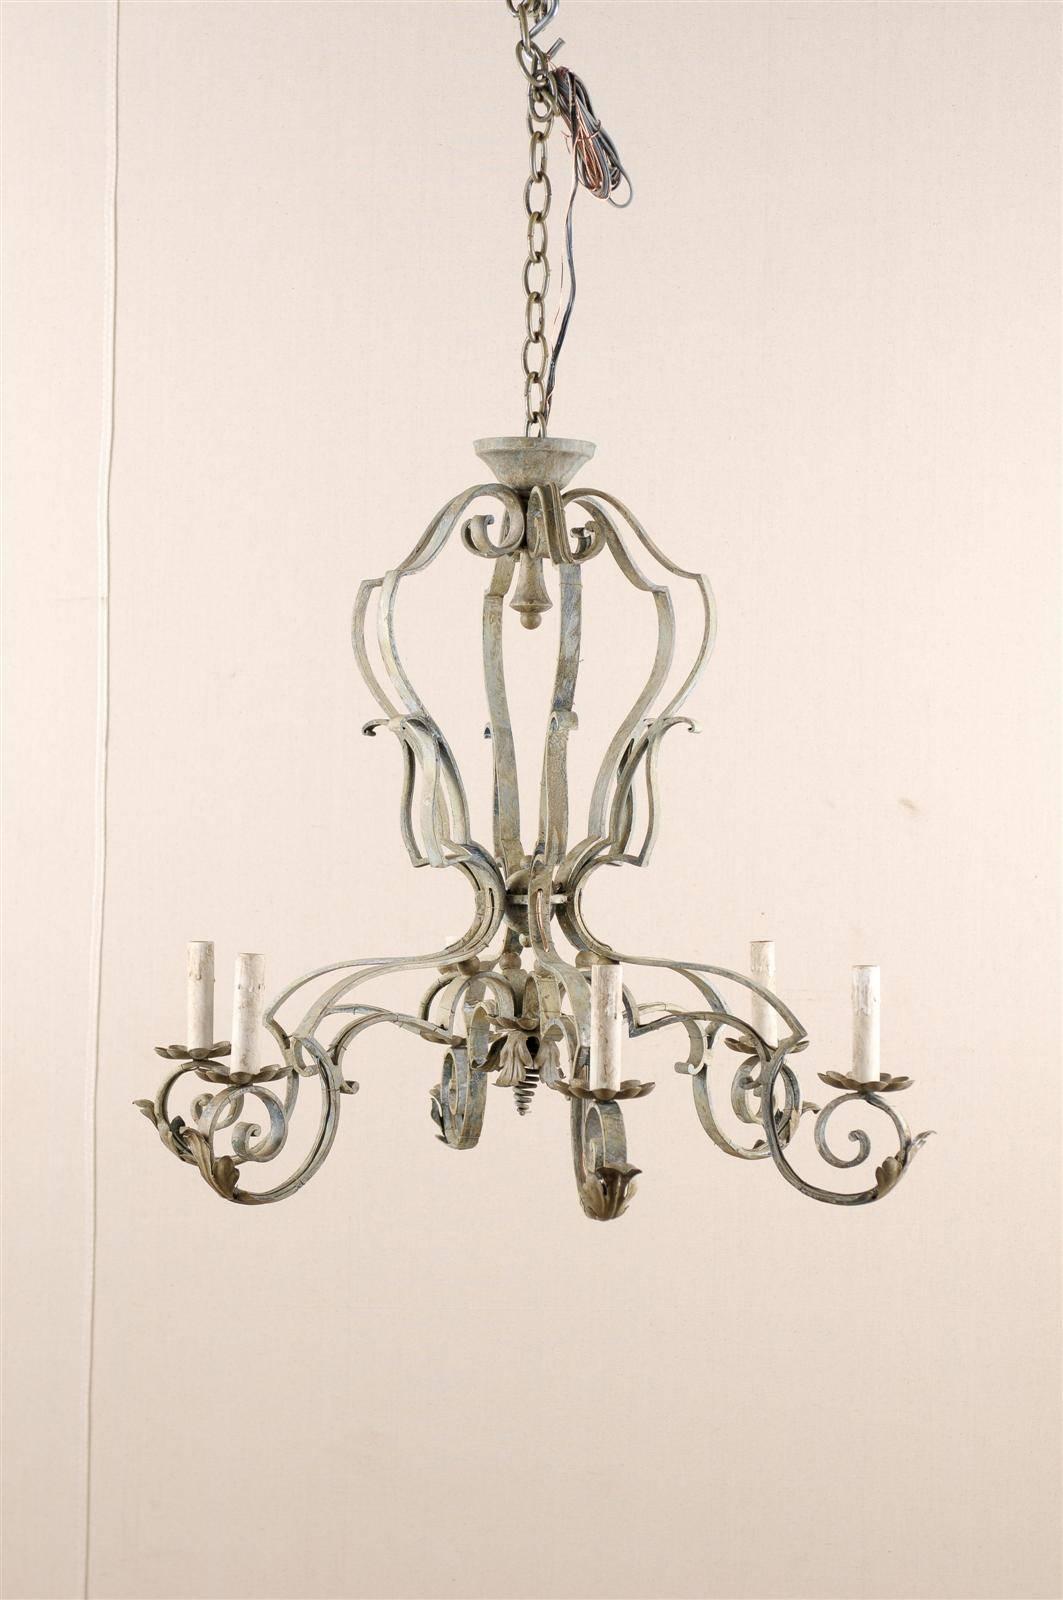 A French painted iron six-light chandelier. This French vintage mid-20th century chandelier is made of a scrolled armature and arms. Acanthus leaves decorate the arms under the flower-shaped bobèches. This French chandelier has been rewired for the